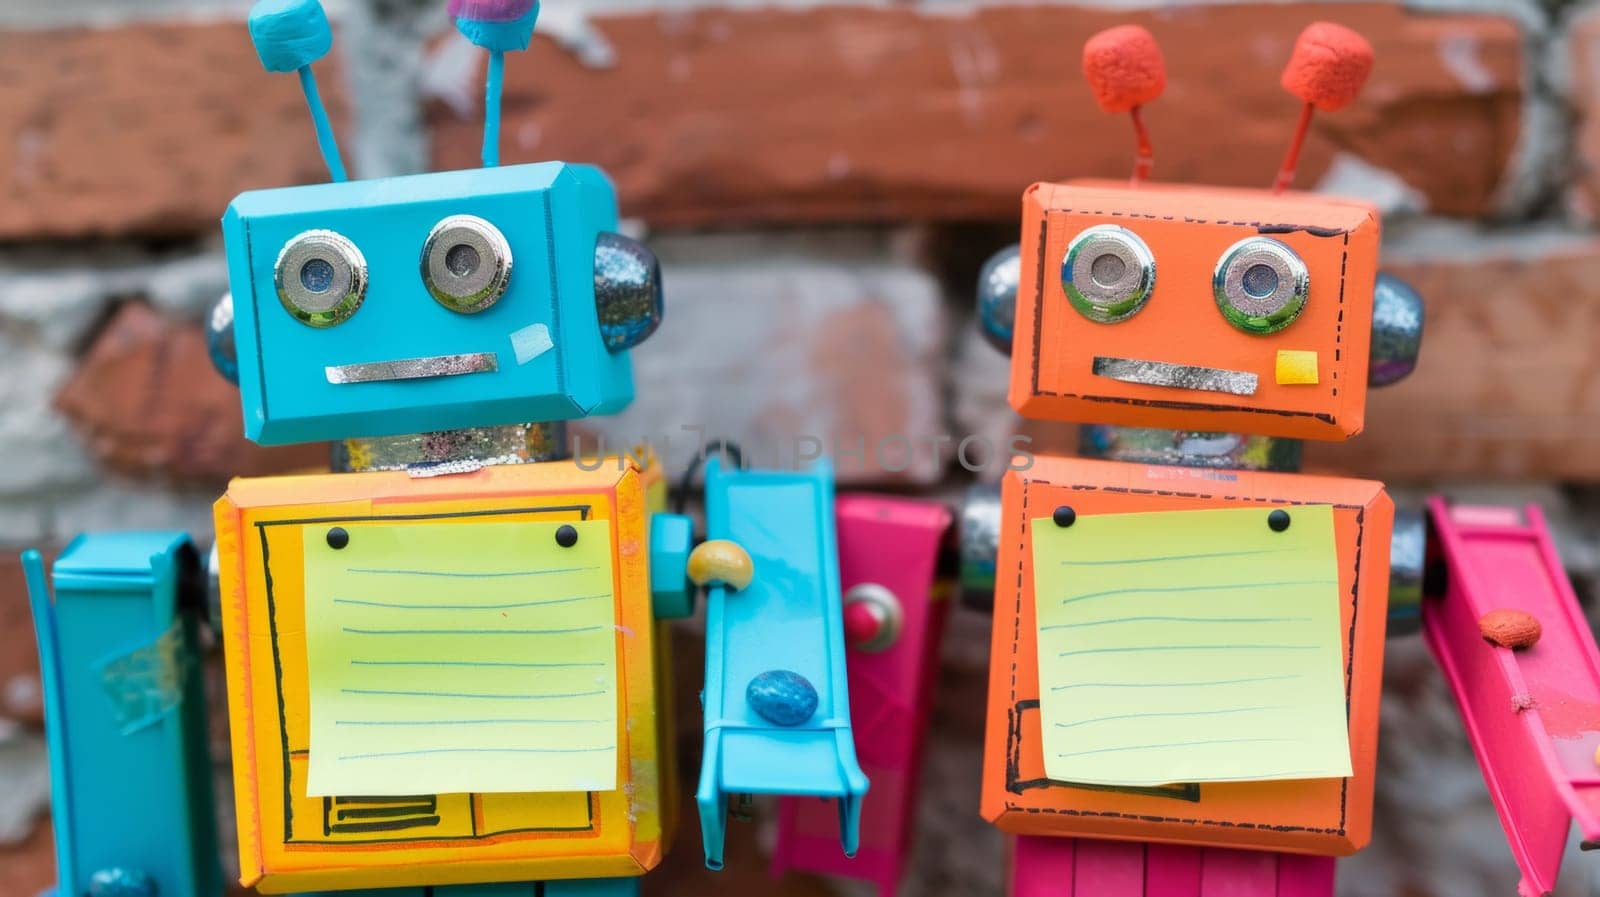 Two colorful robots with note pads attached to their backs, AI by starush